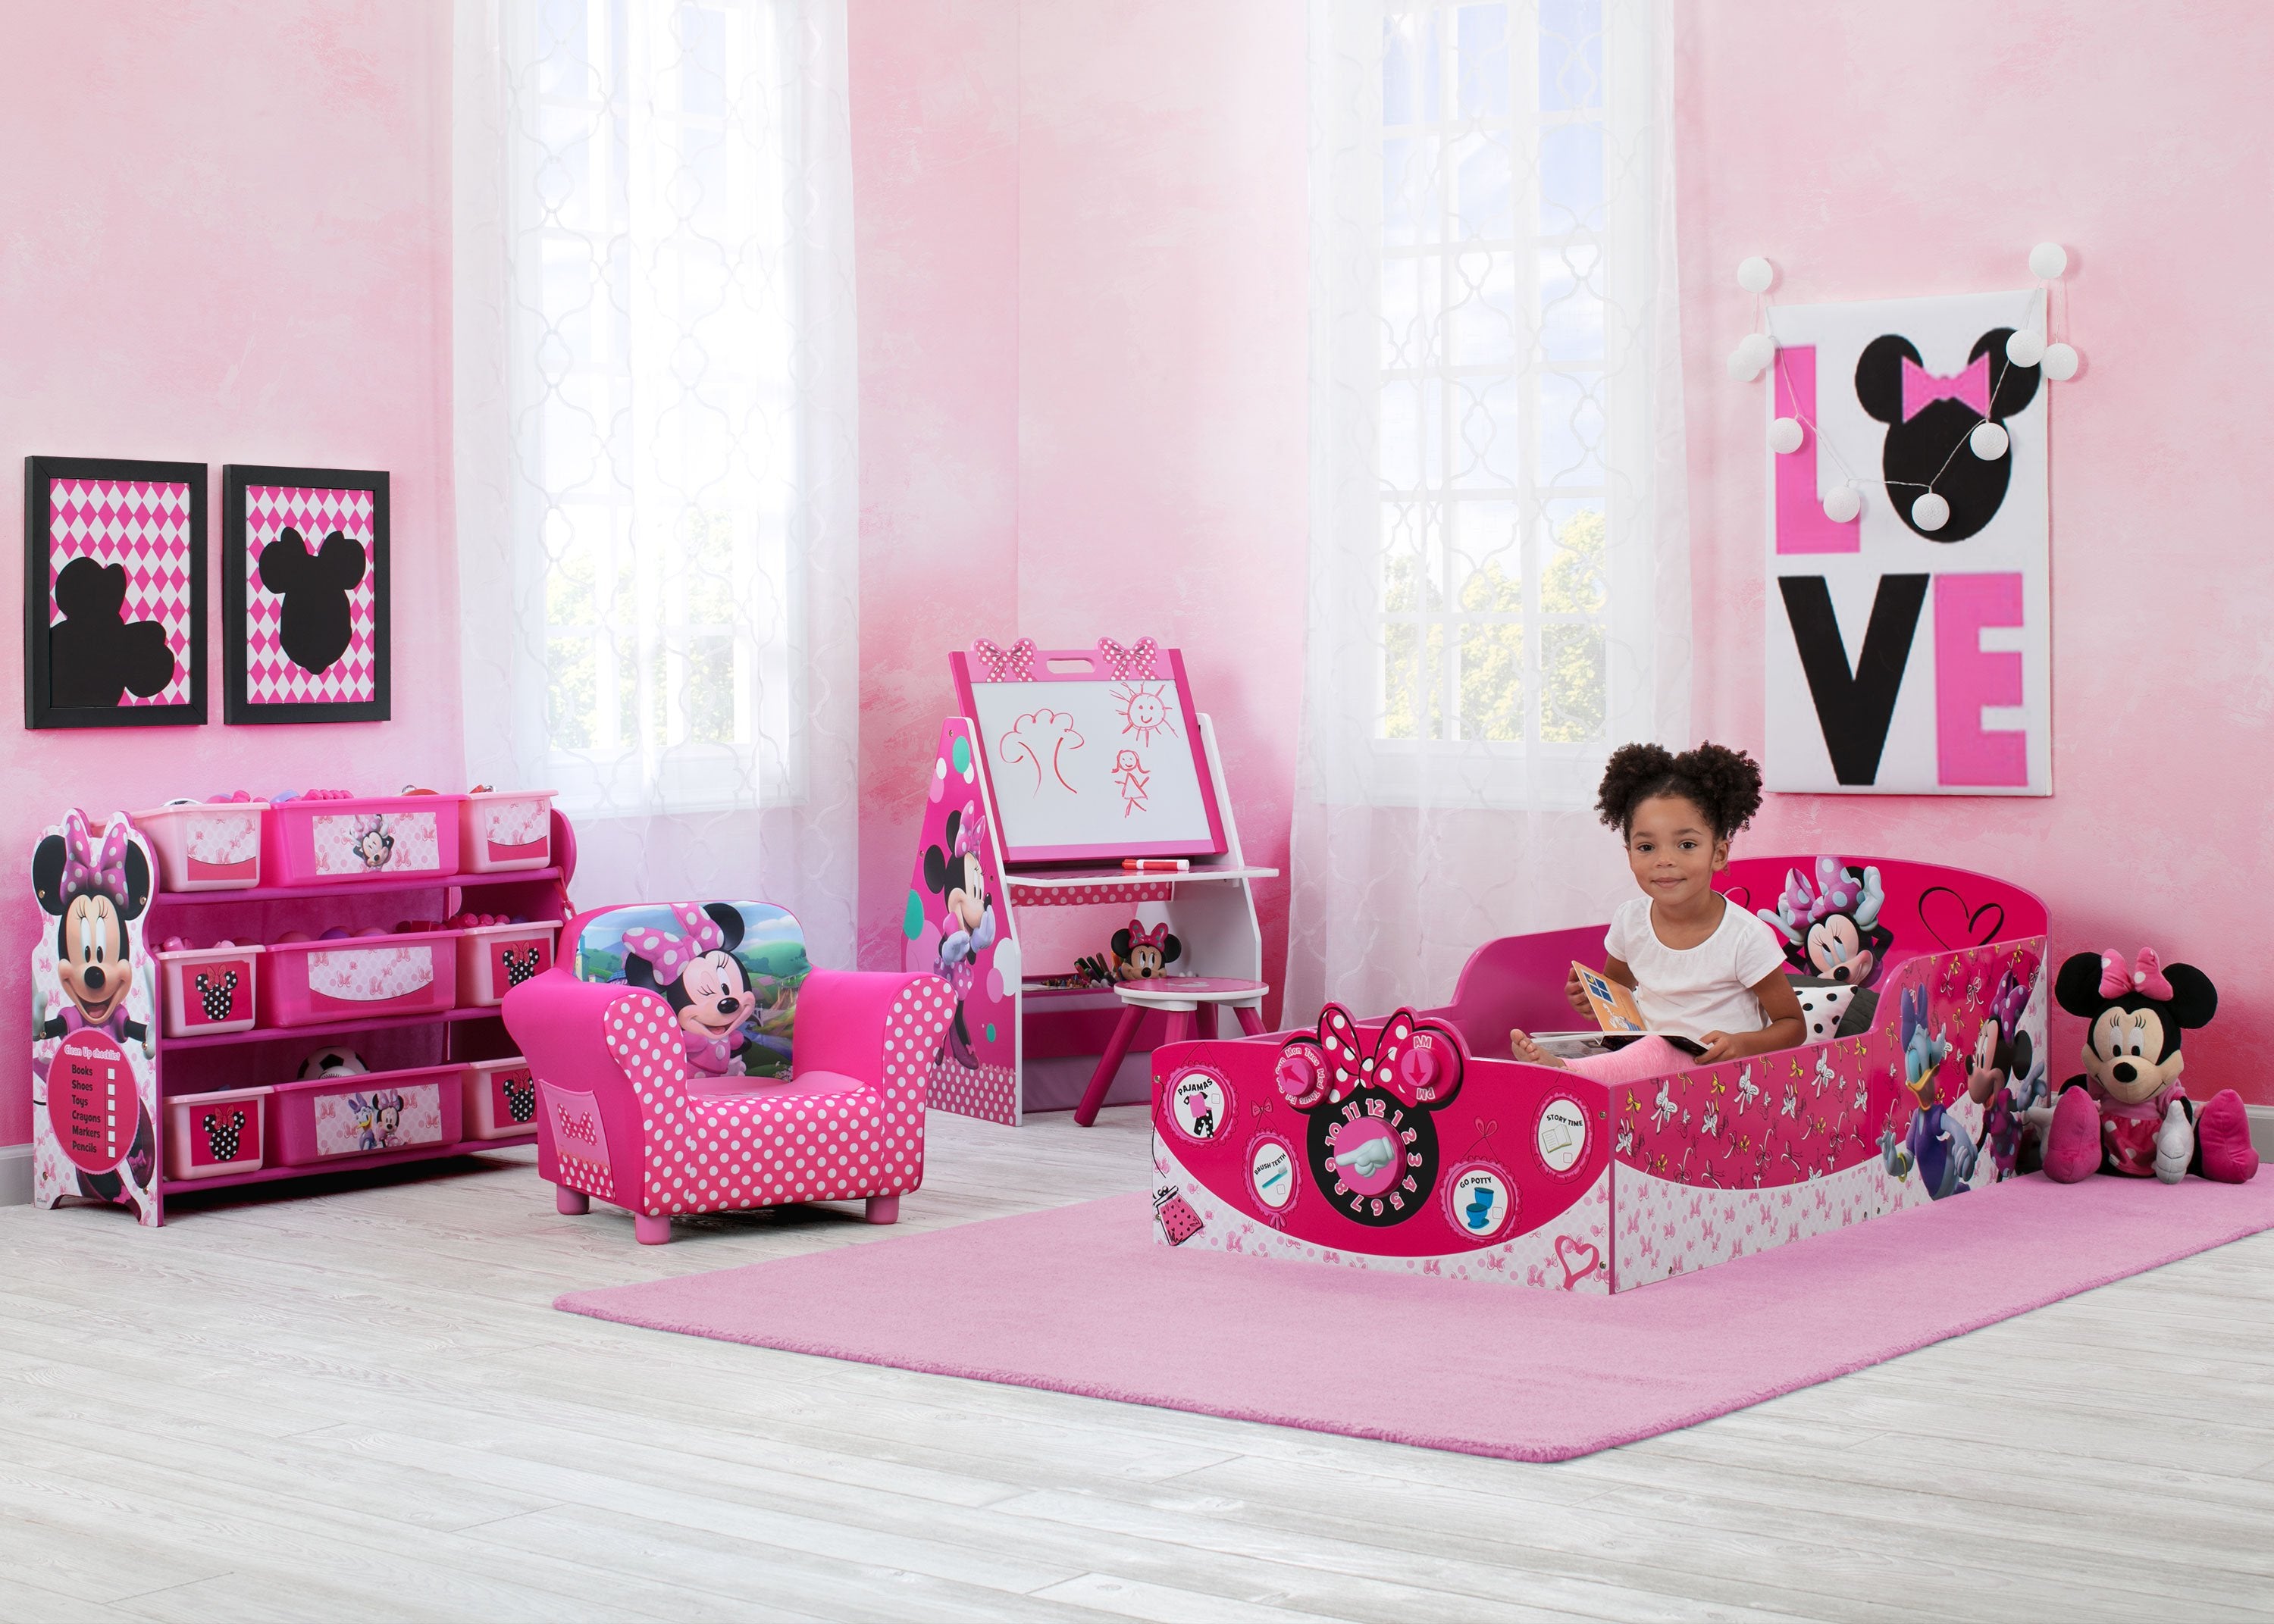 delta children disney minnie mouse twin bedroom collection